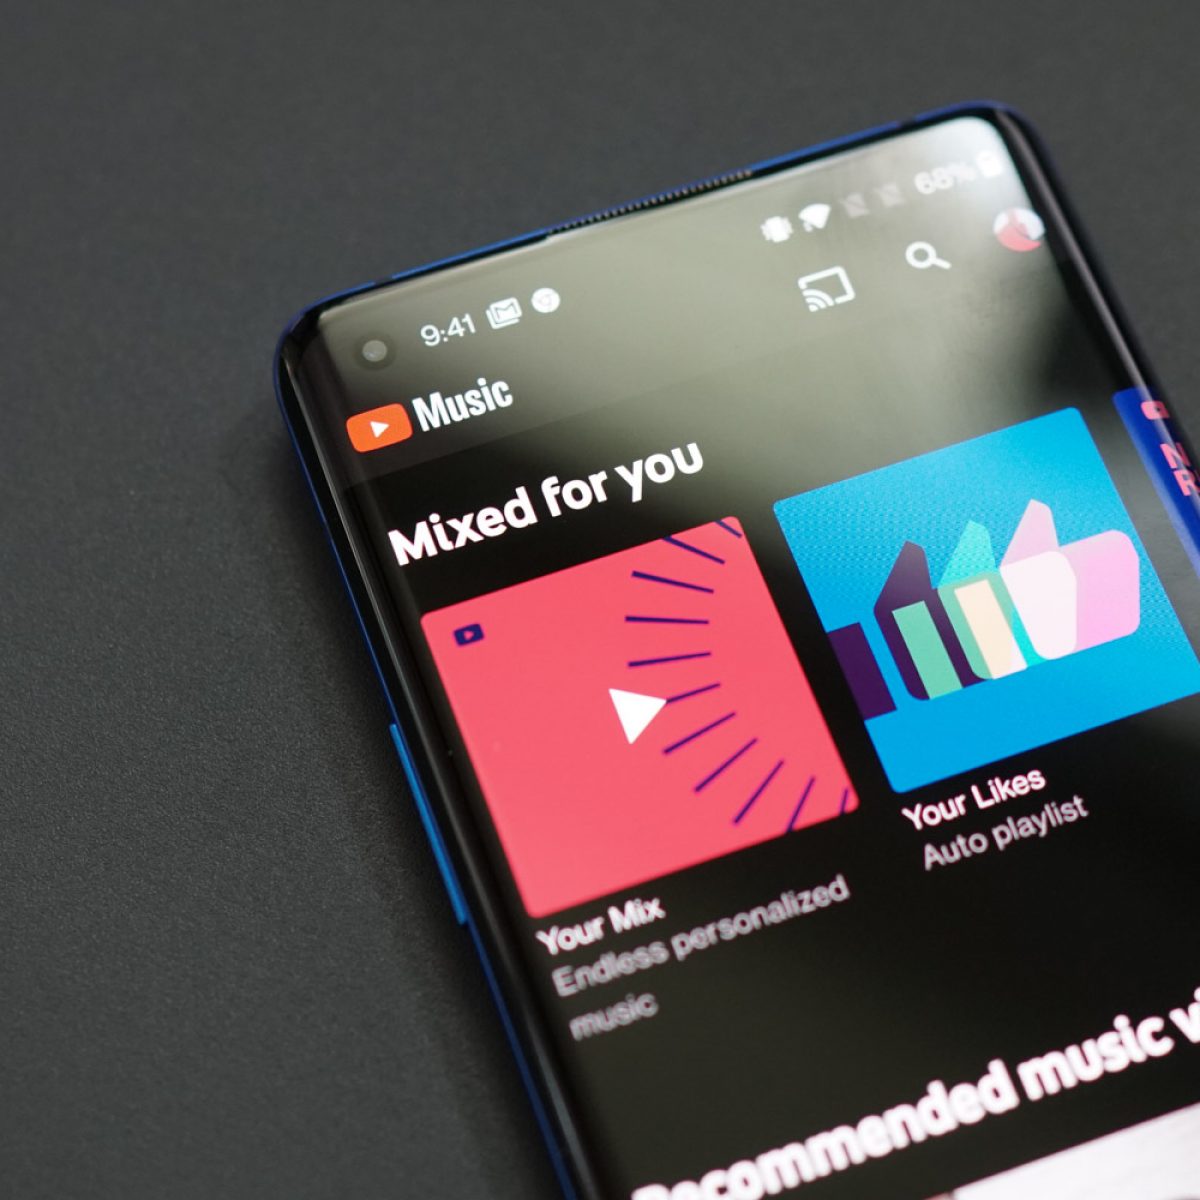 YouTube Music Picks Up Its Best Free Feature in a While